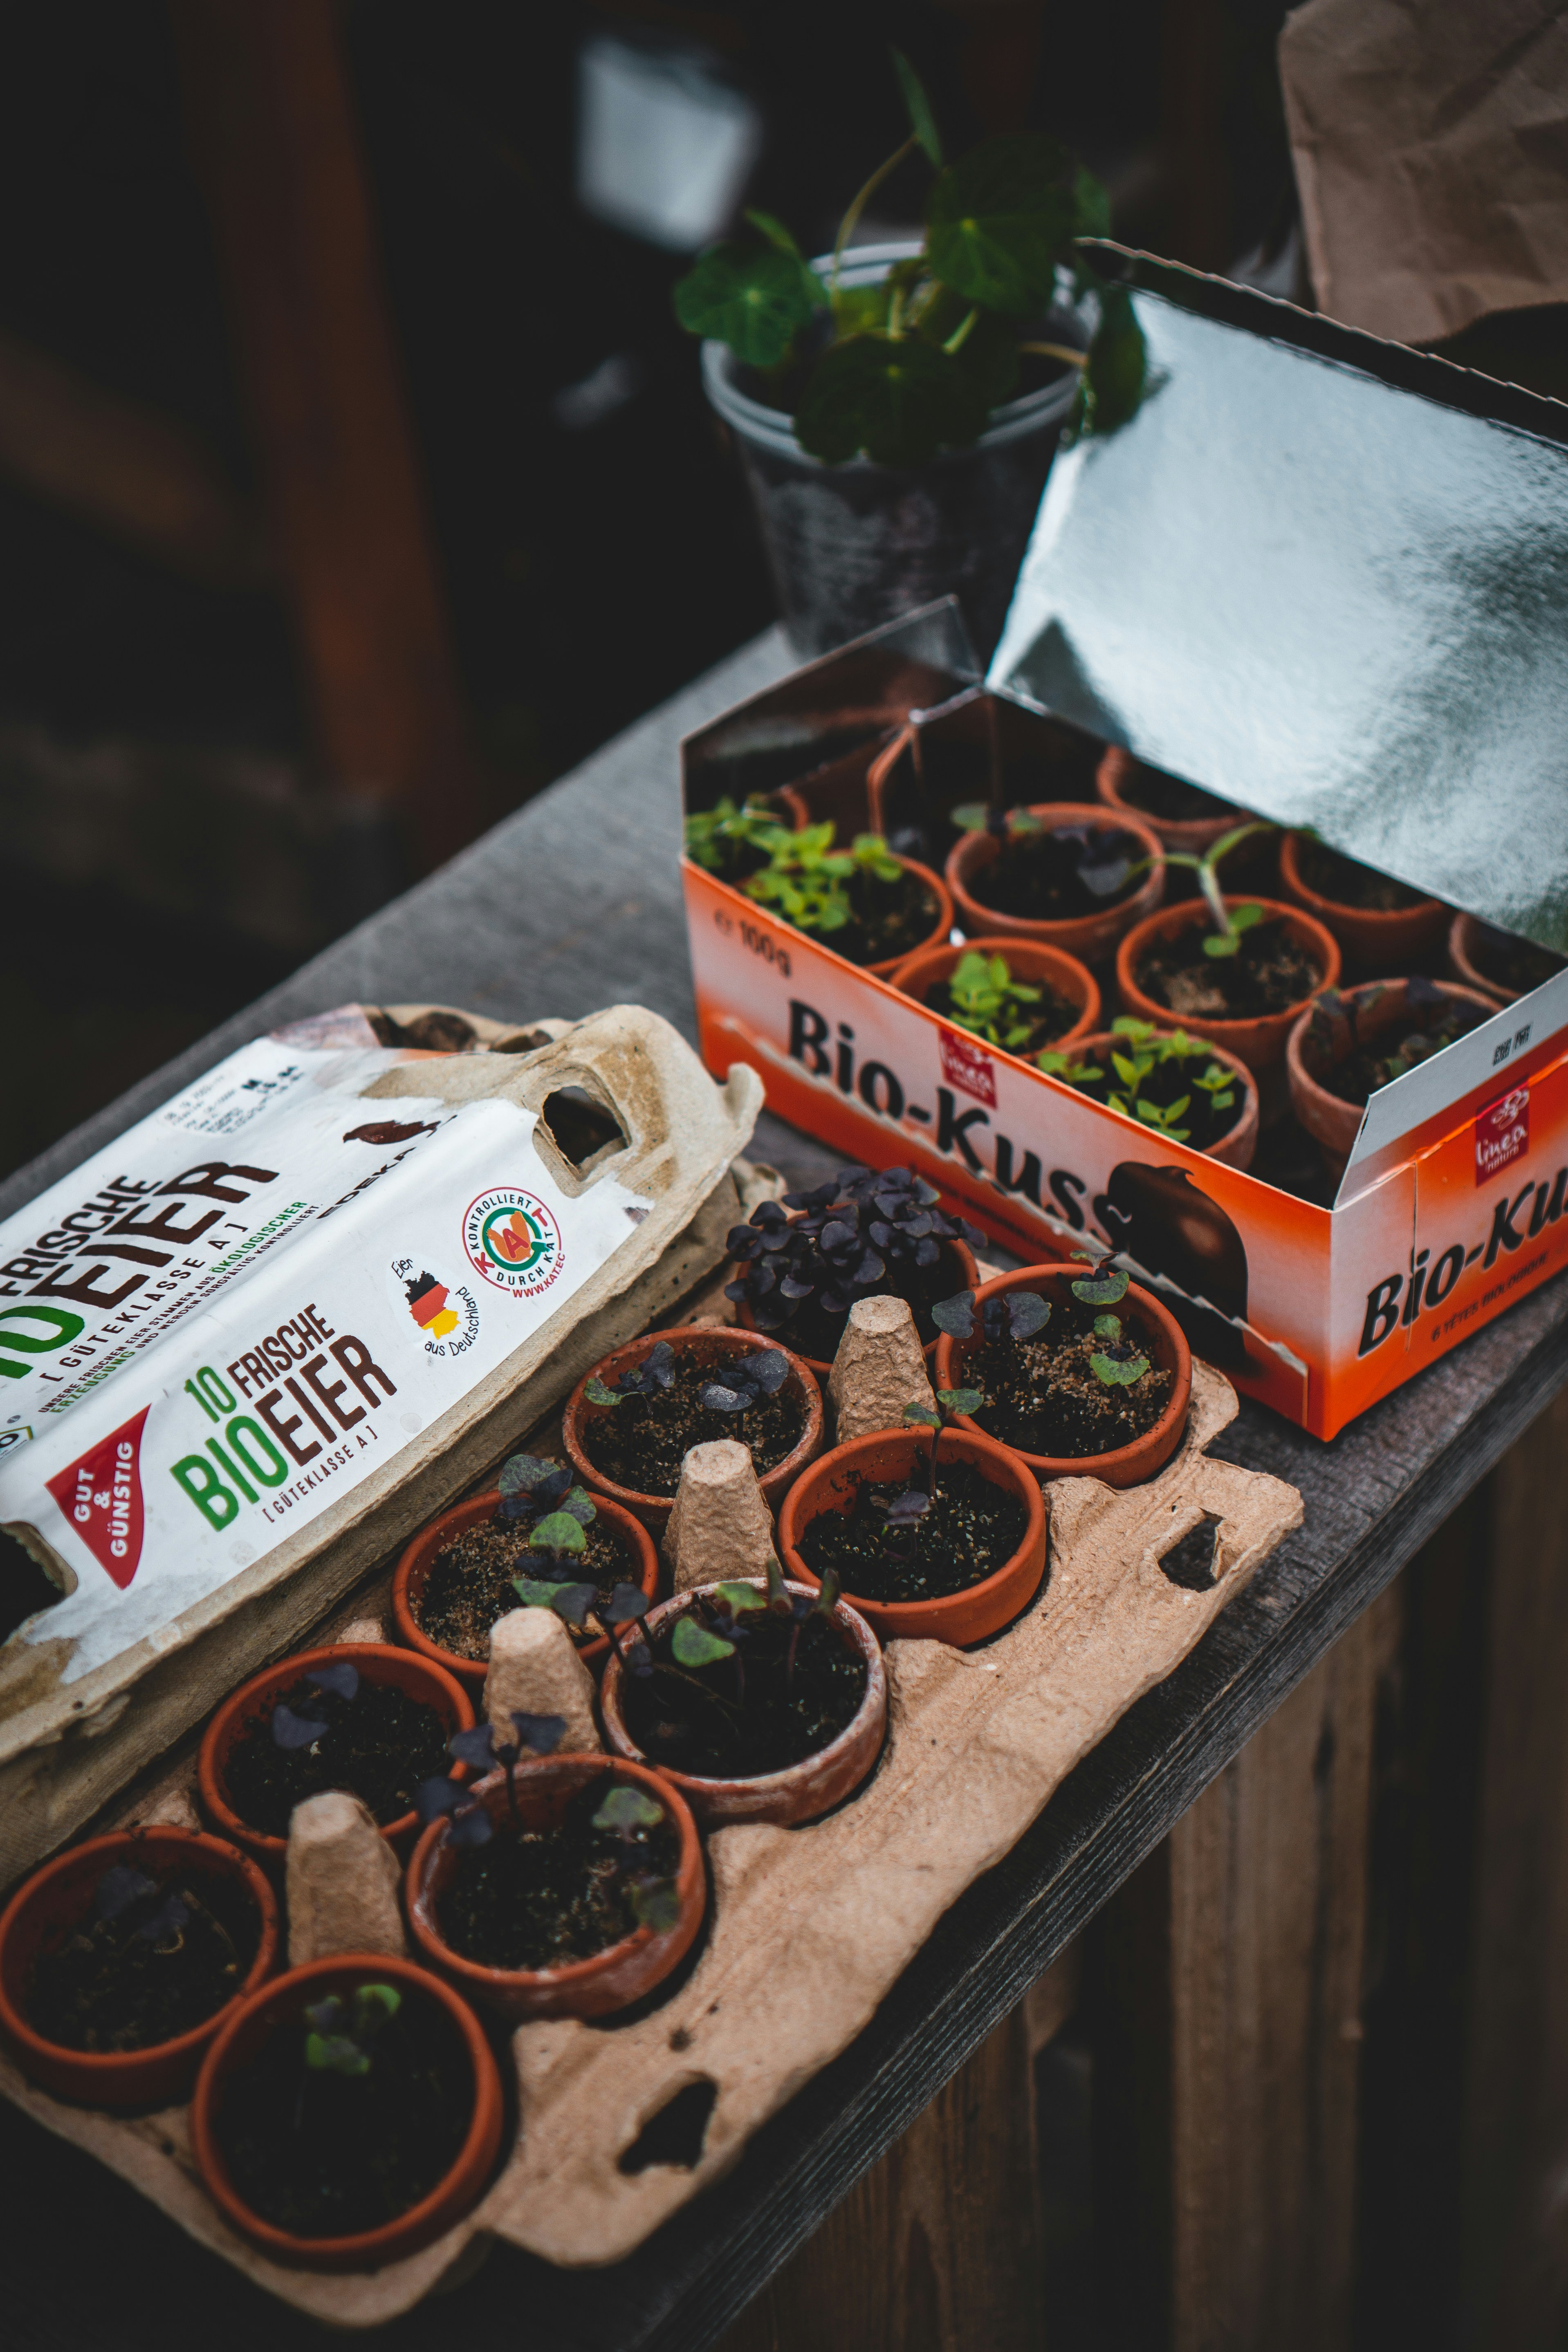 How Do I Choose The Right Fertilizer For My Plants?